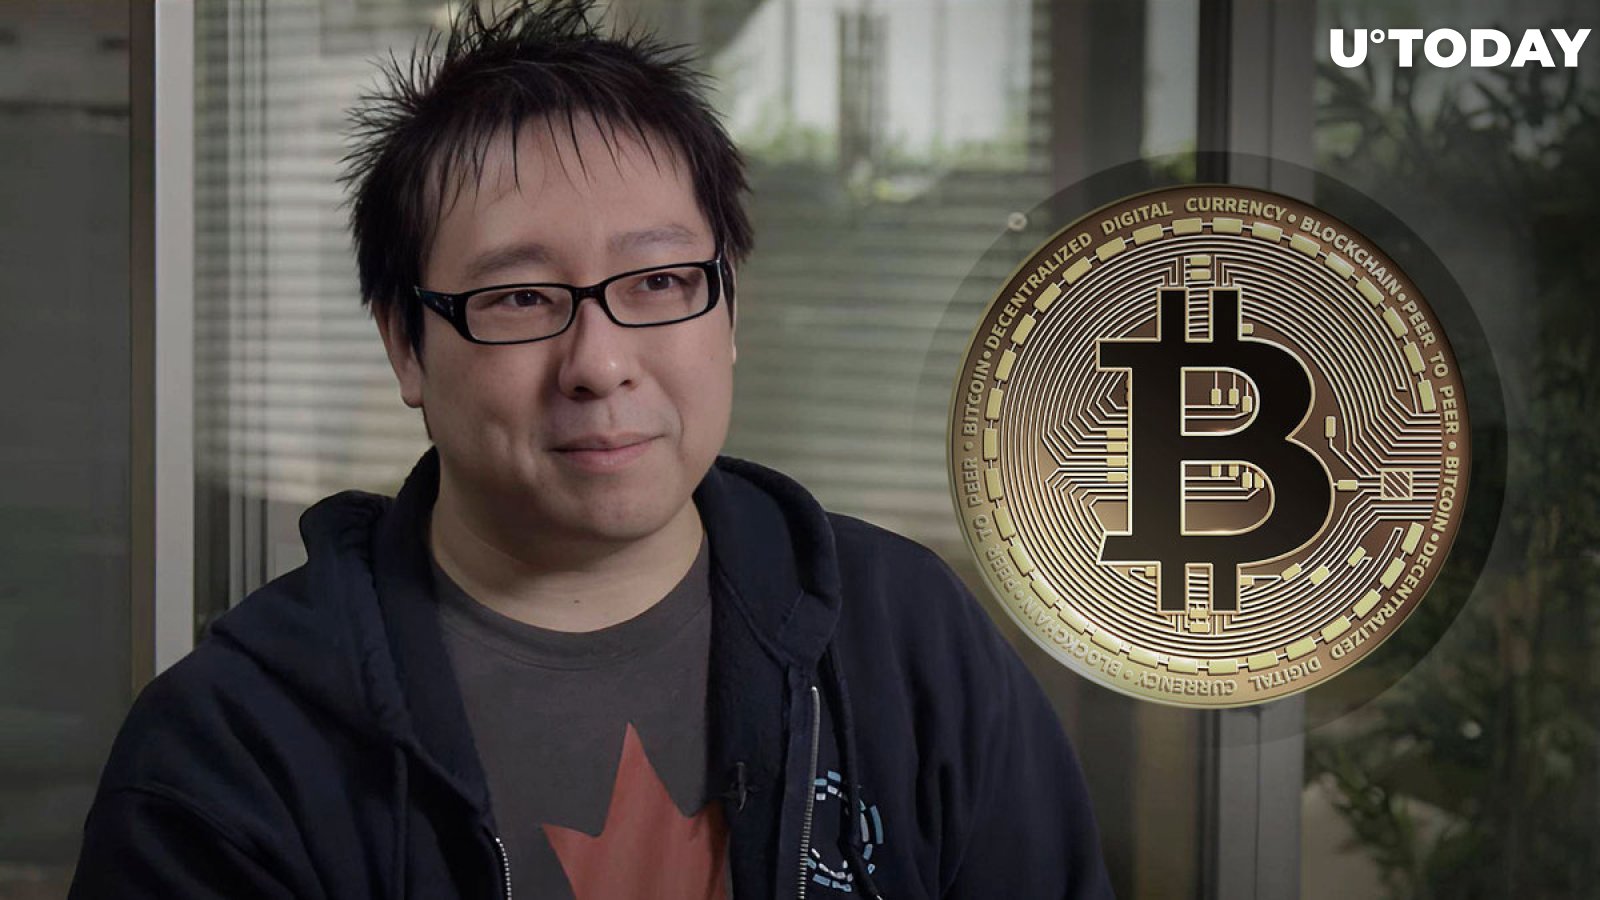 Crucial Bitcoin (BTC) Call to World's Governments Made by Samson Mow